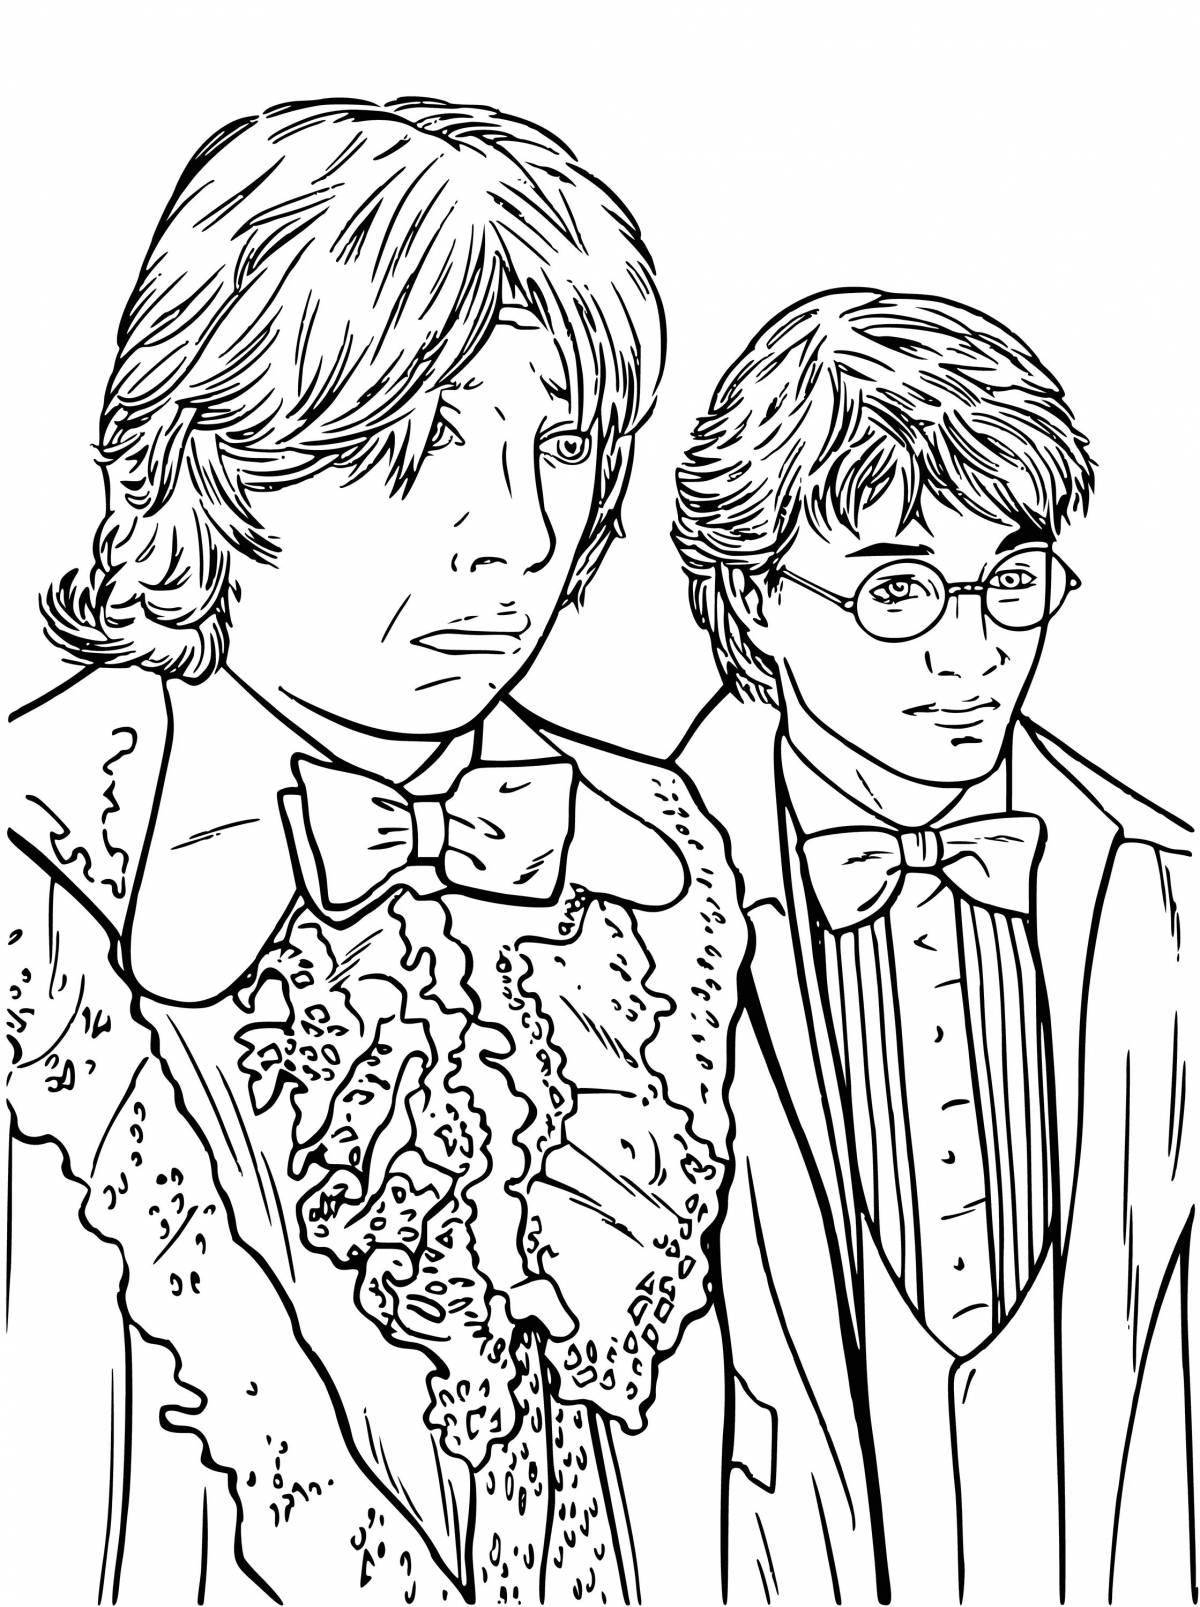 Harry potter harry ron and hermione marvelous coloring book